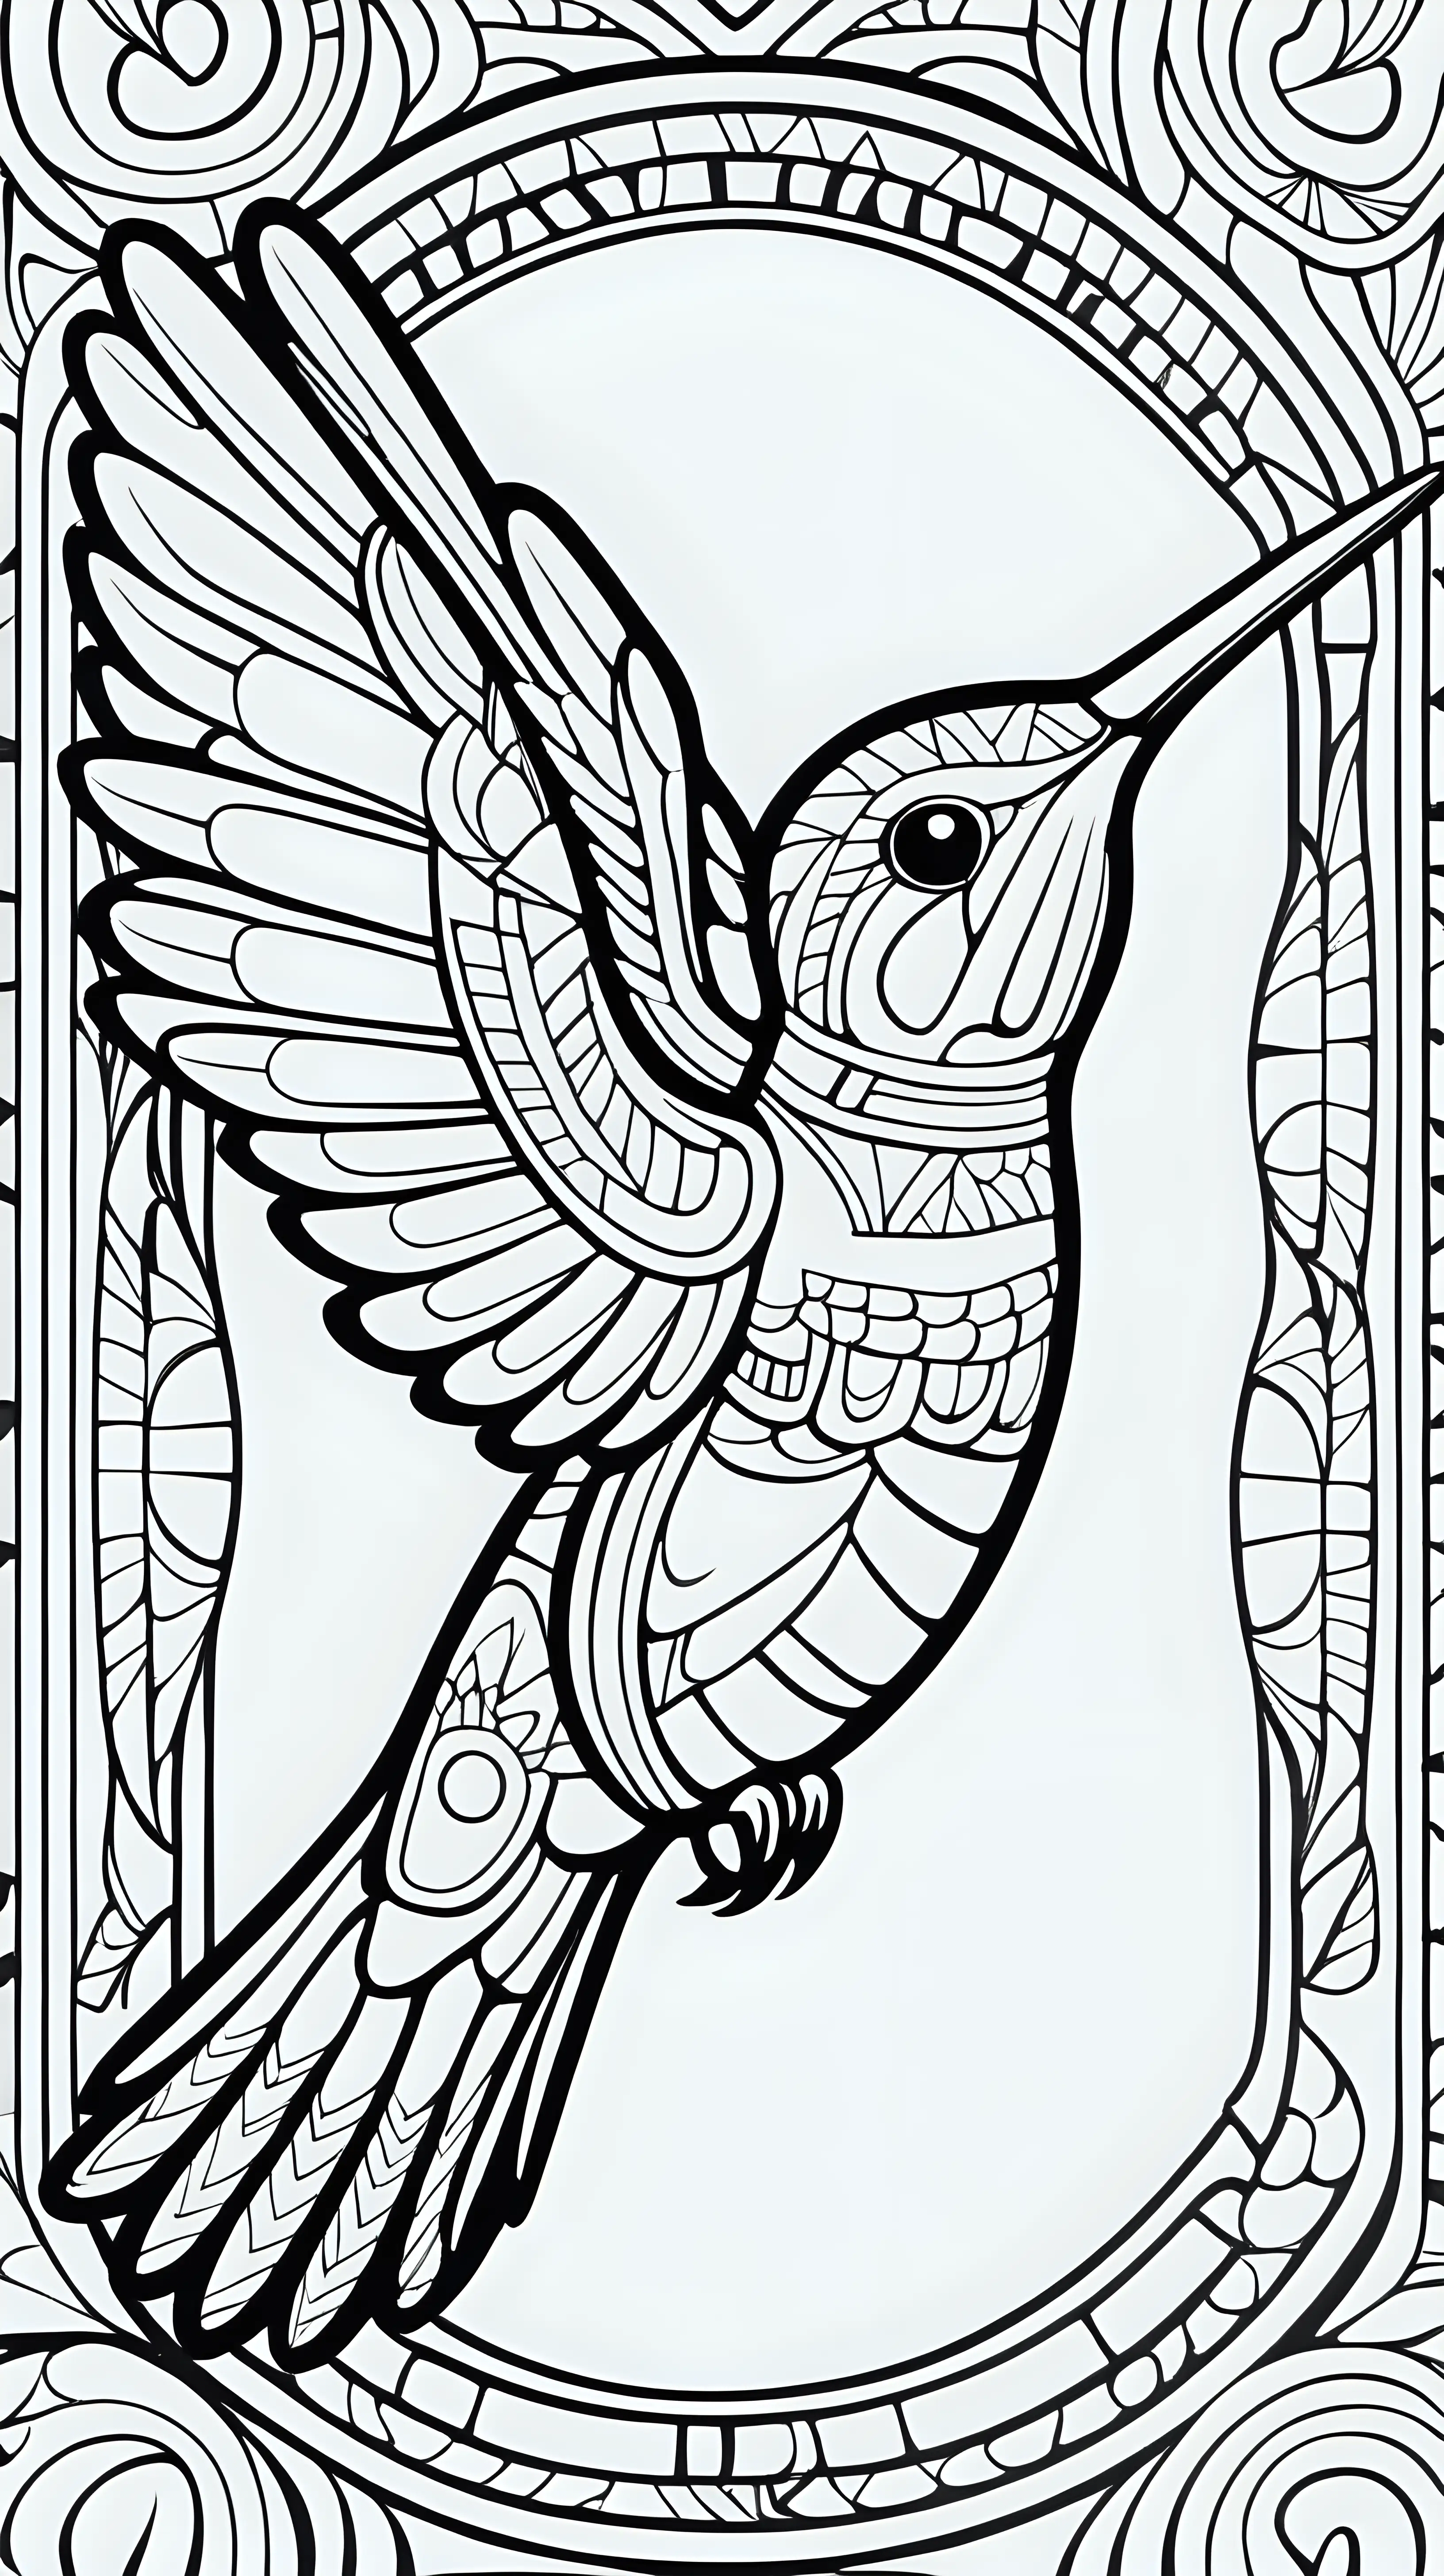 Hummingbird totem symbolizing joy and healing, inspired by the Hopi tribe, coloring book image, clean thick black lines